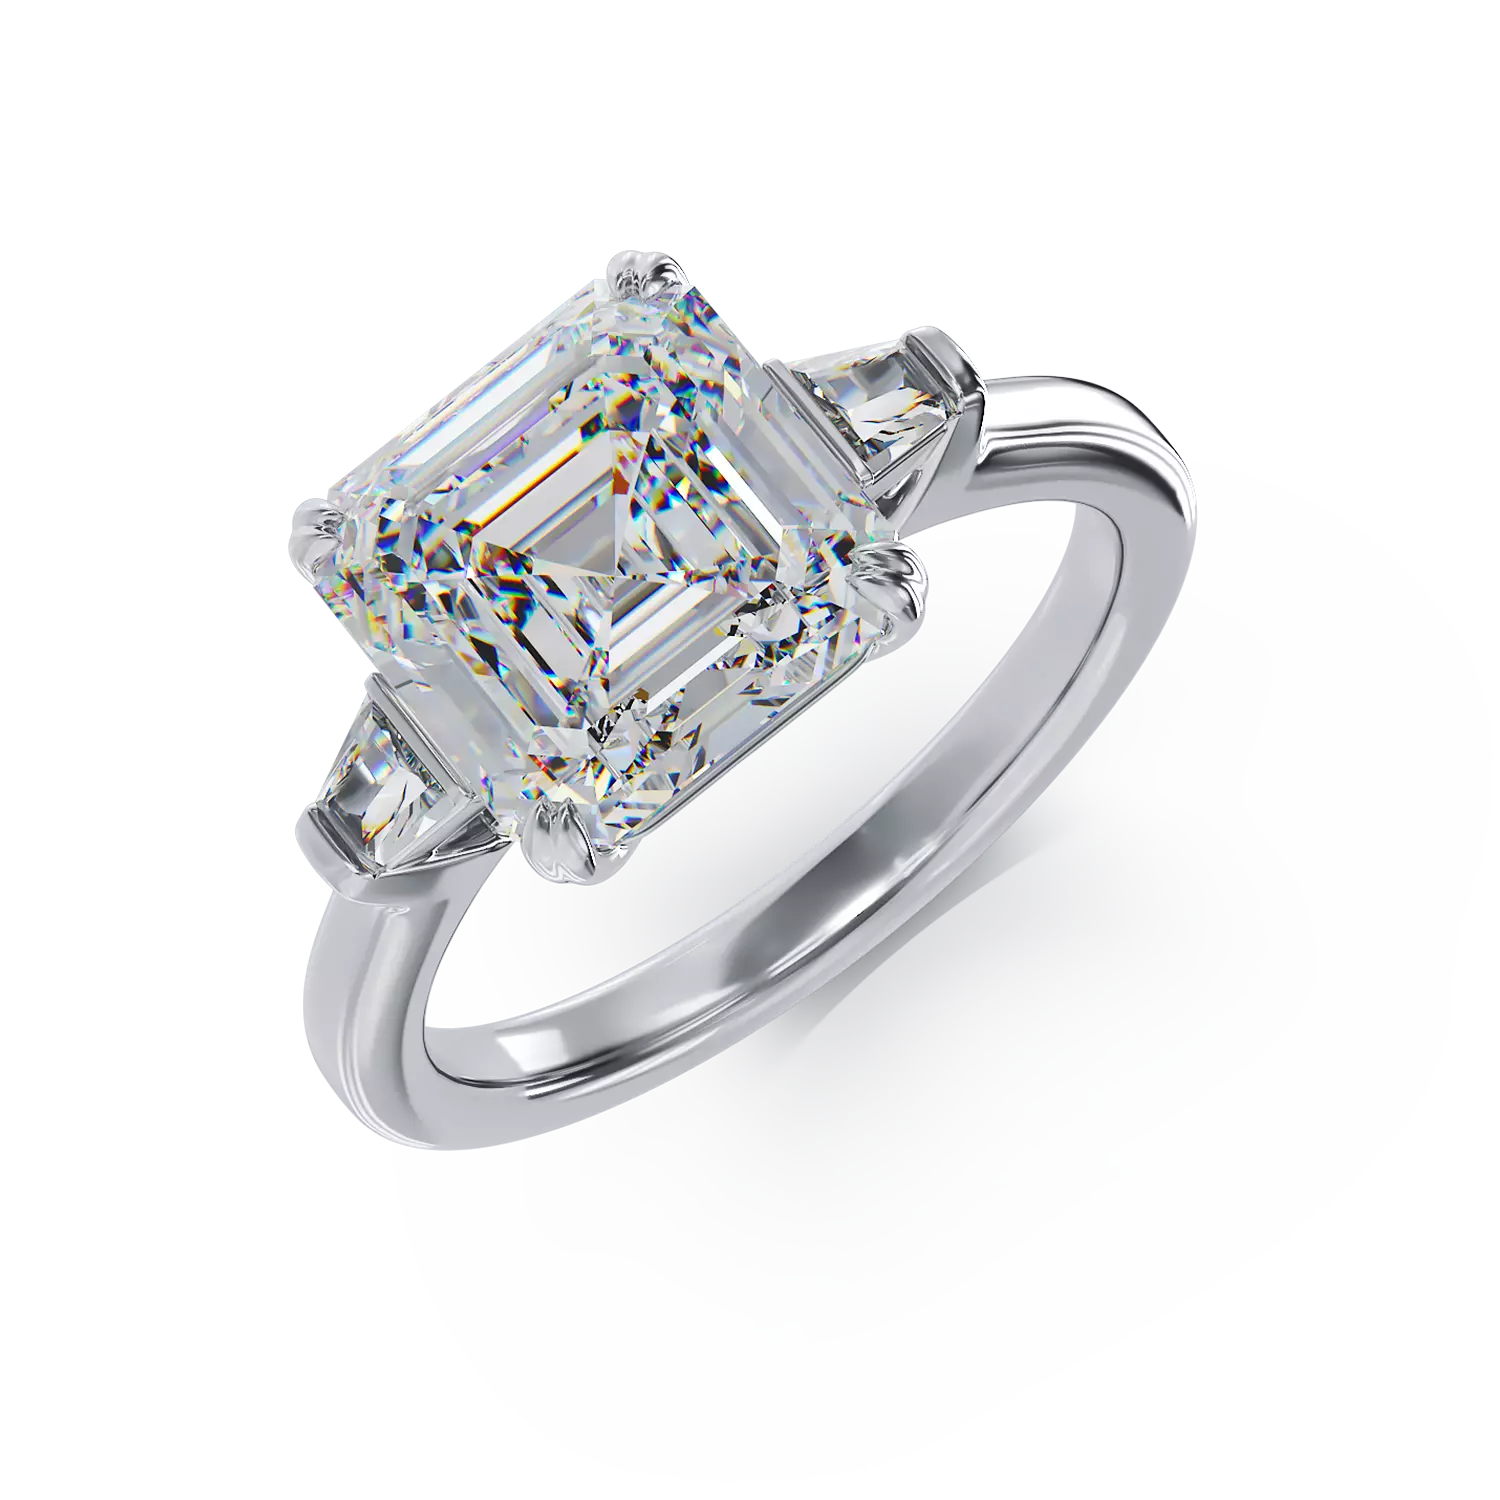 18K white gold ring with 3.19ct diamonds